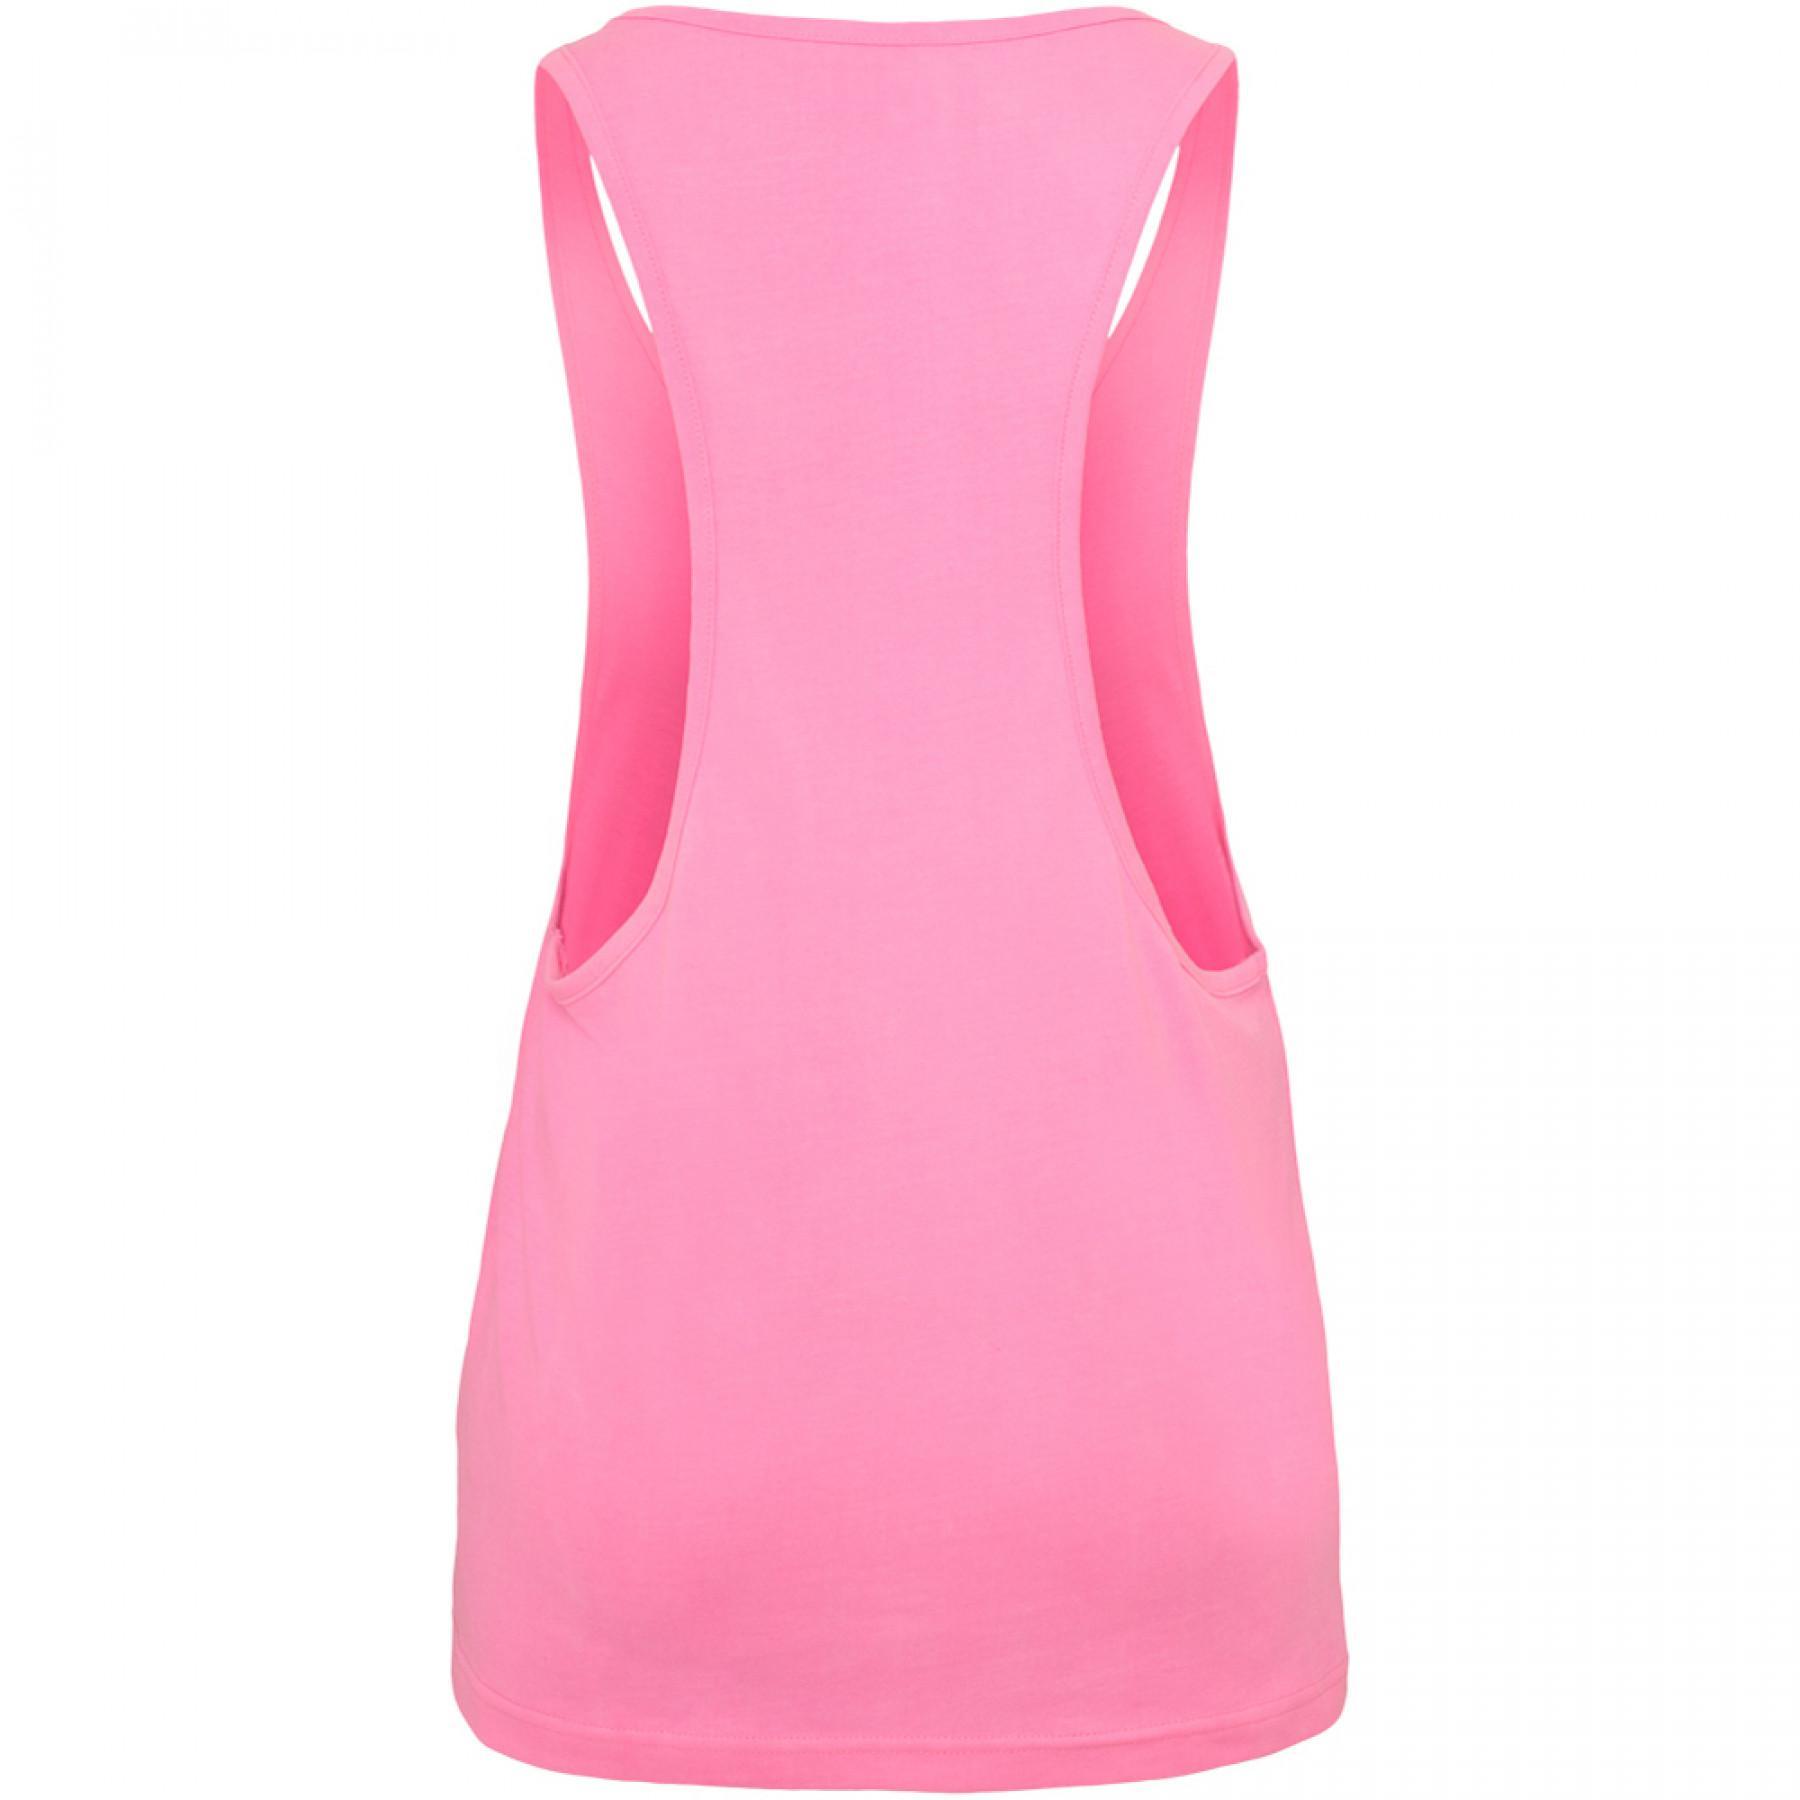 Women's Urban Classic loose neon tank top - Others - Brands - Lifestyle